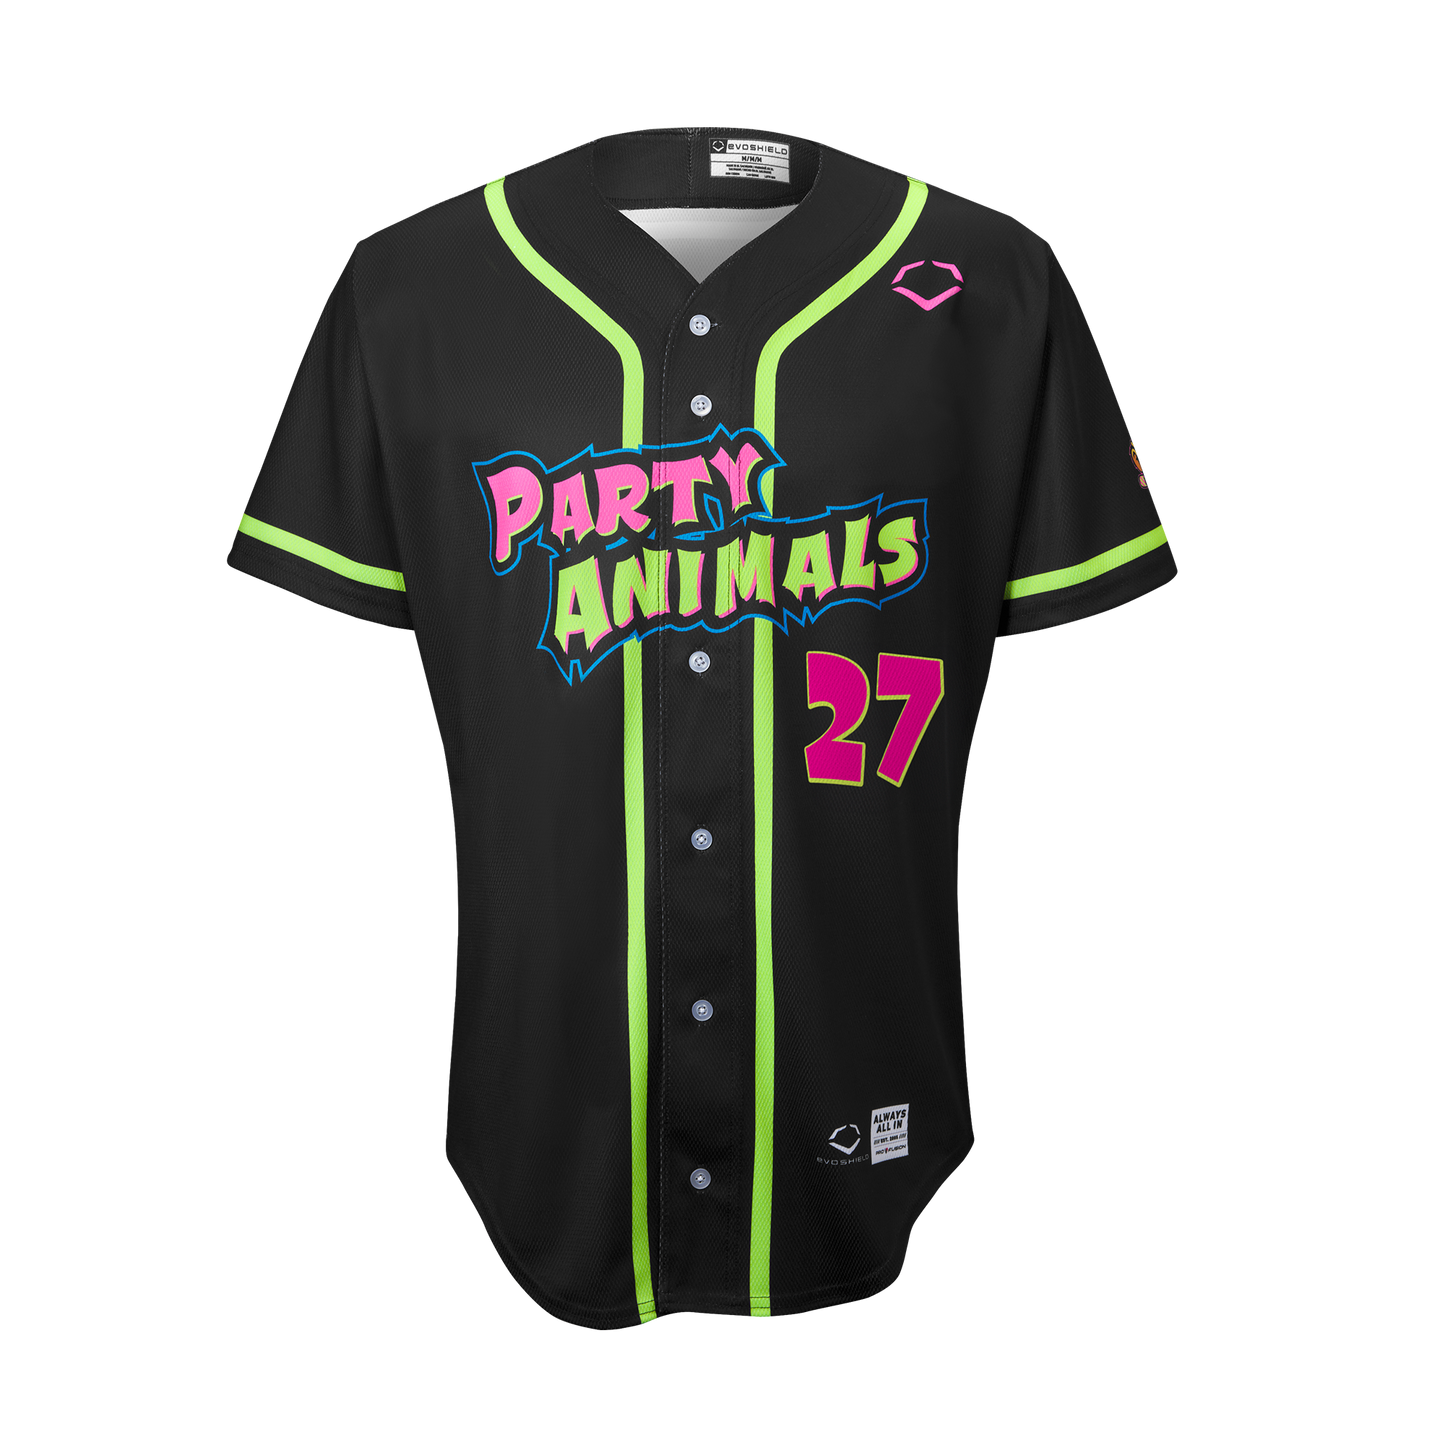 YOUTH Party Animals Jake Lialios #27 EvoShield Jersey - Black